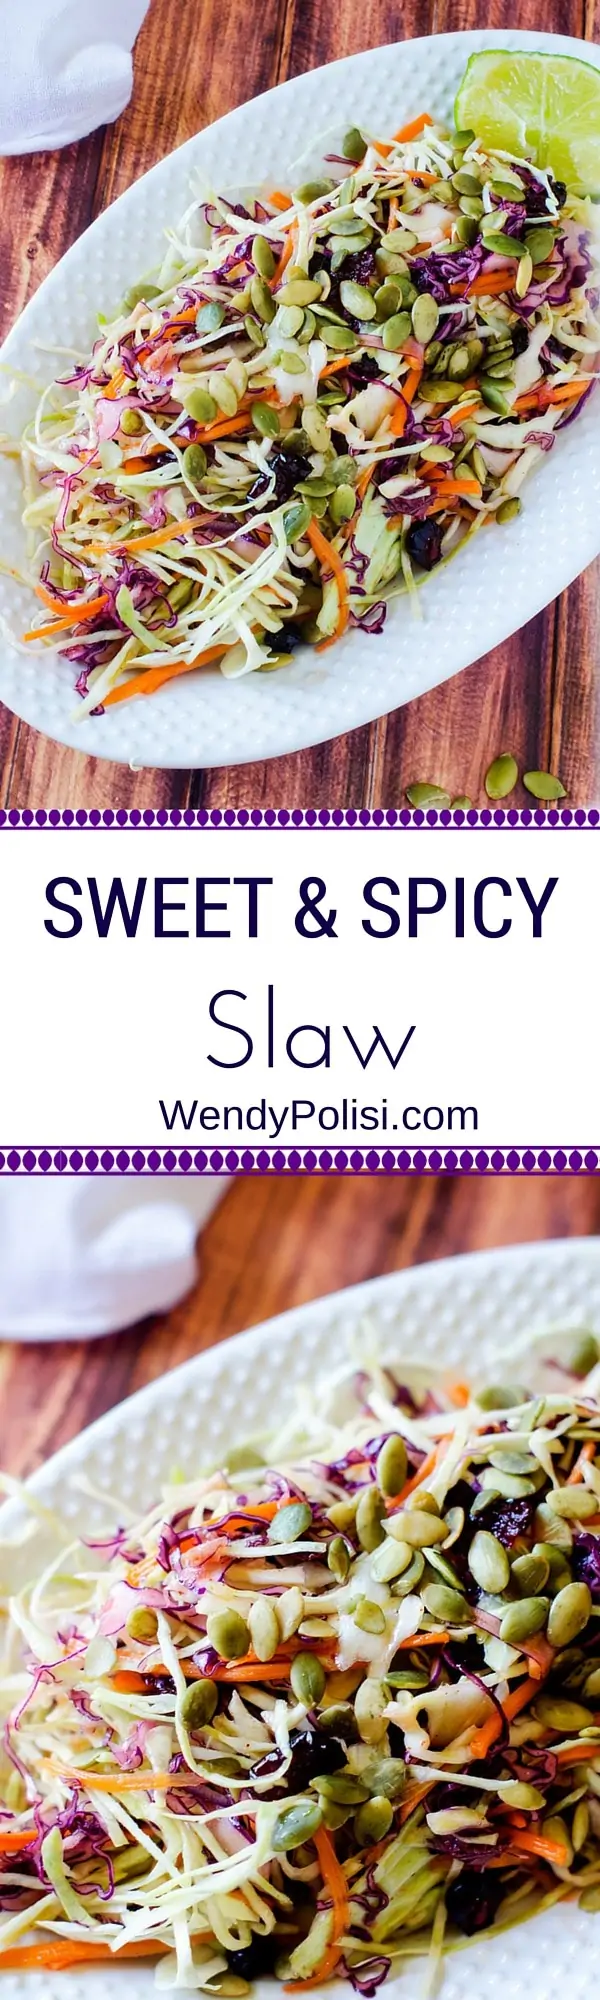 Sweet & Spicy Slaw - A Healthier Twist on a Classic! Vegan, Mayo Free, and Gluten Free - WendyPolisi.com